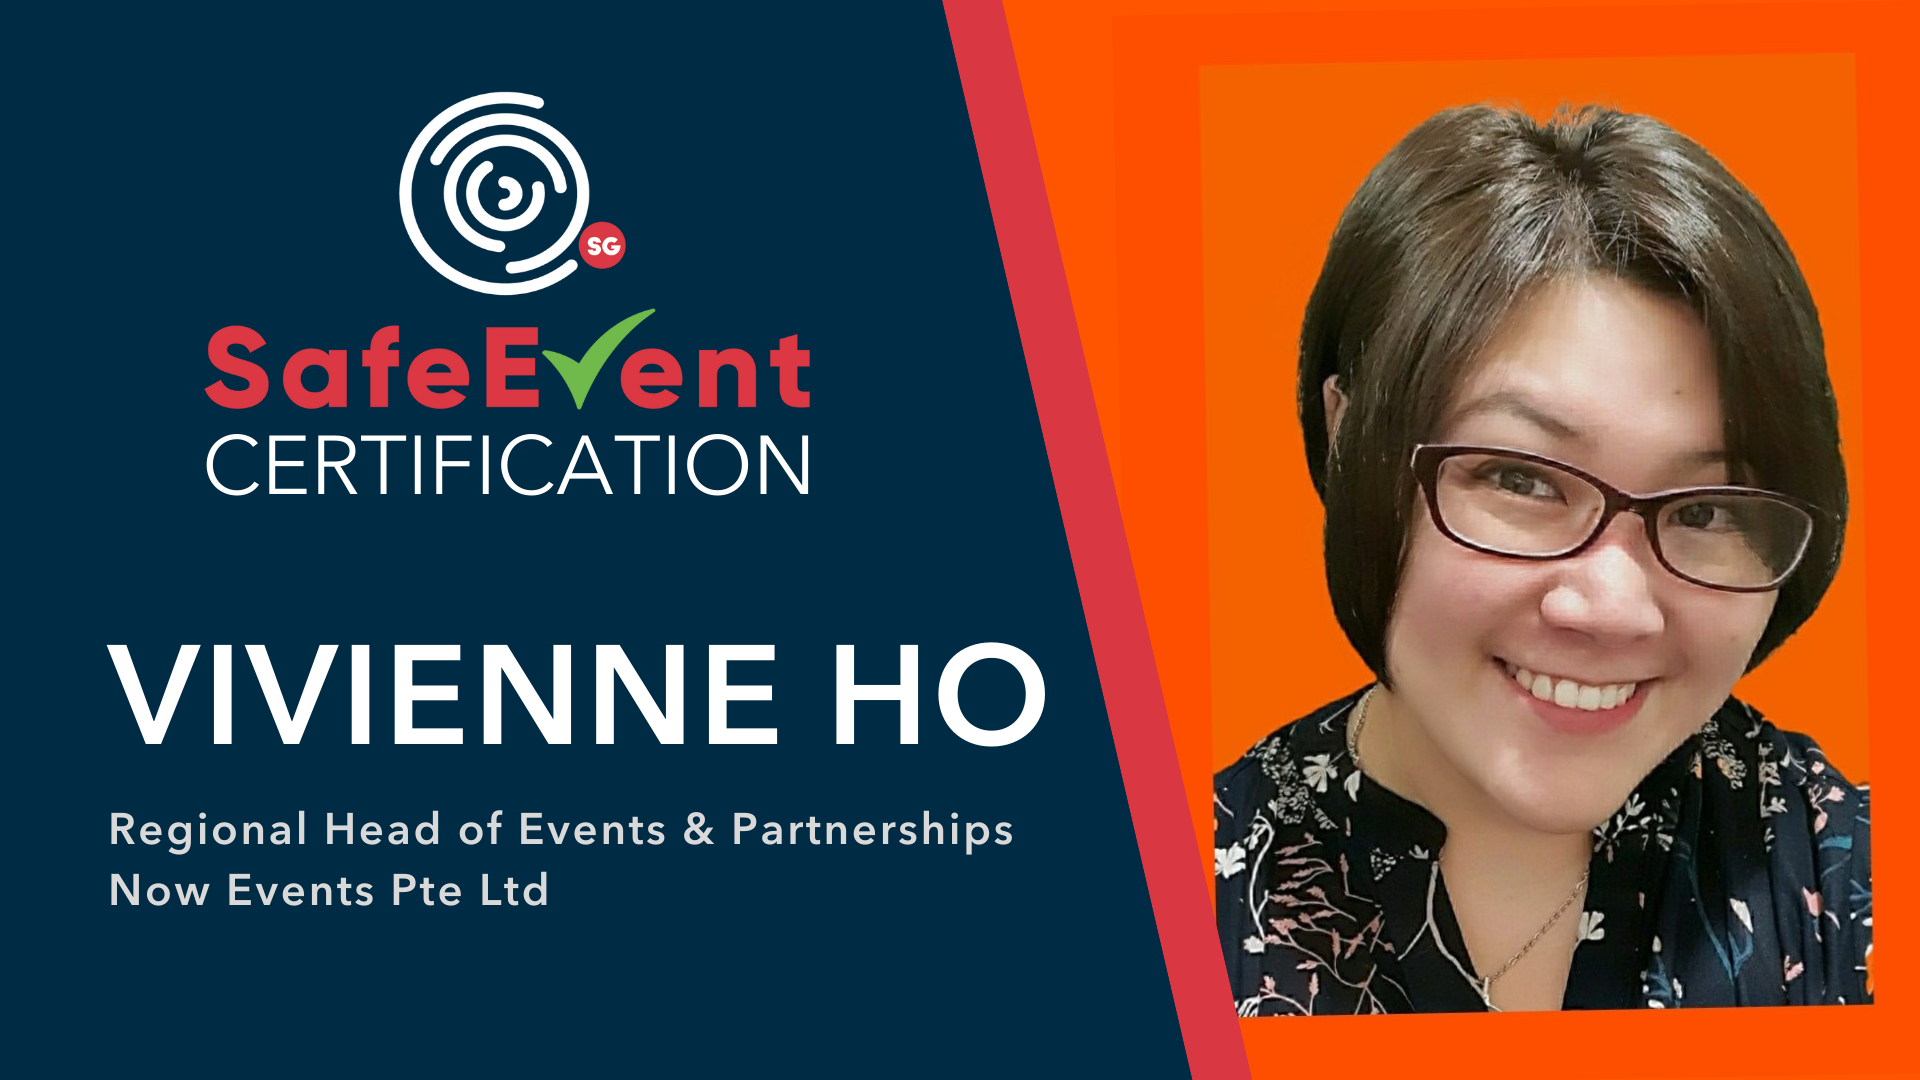 SG SafeEvent Certification: Vivienne Ho, Regional Head of Events & Partnerships of Now Events Pte Ltd